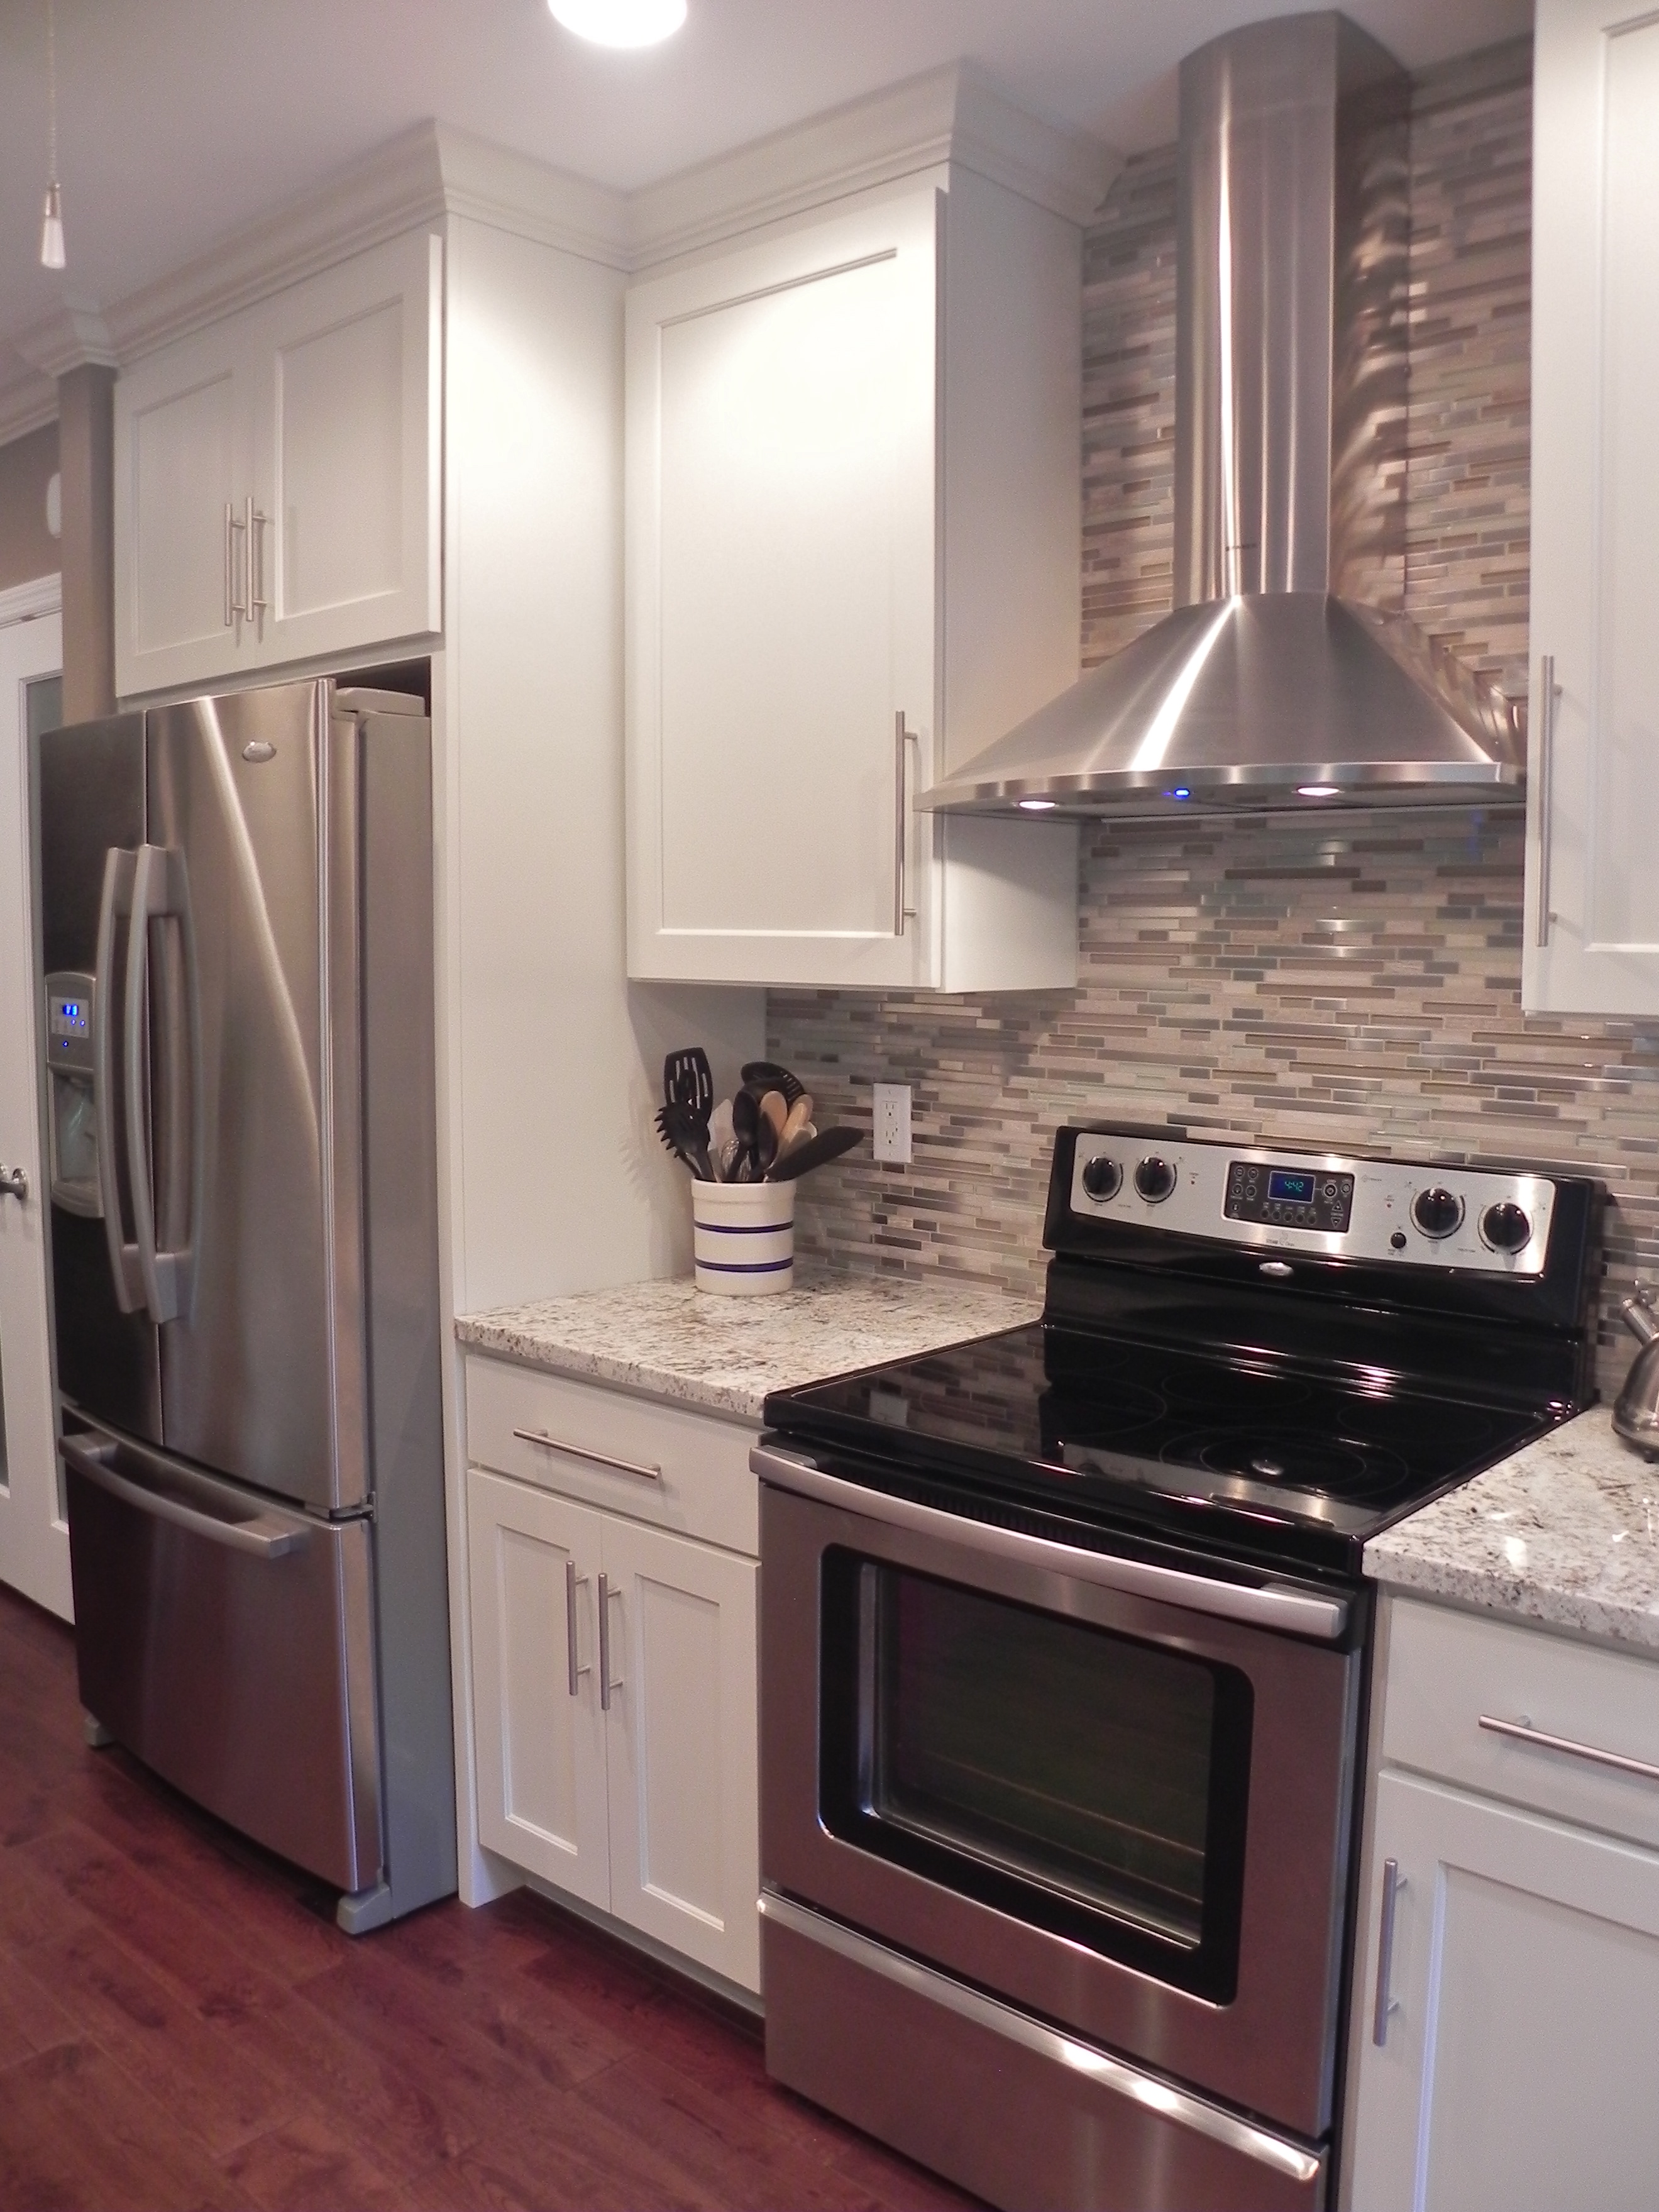 Tips to prepare for a kitchen remodel • Current Publishing